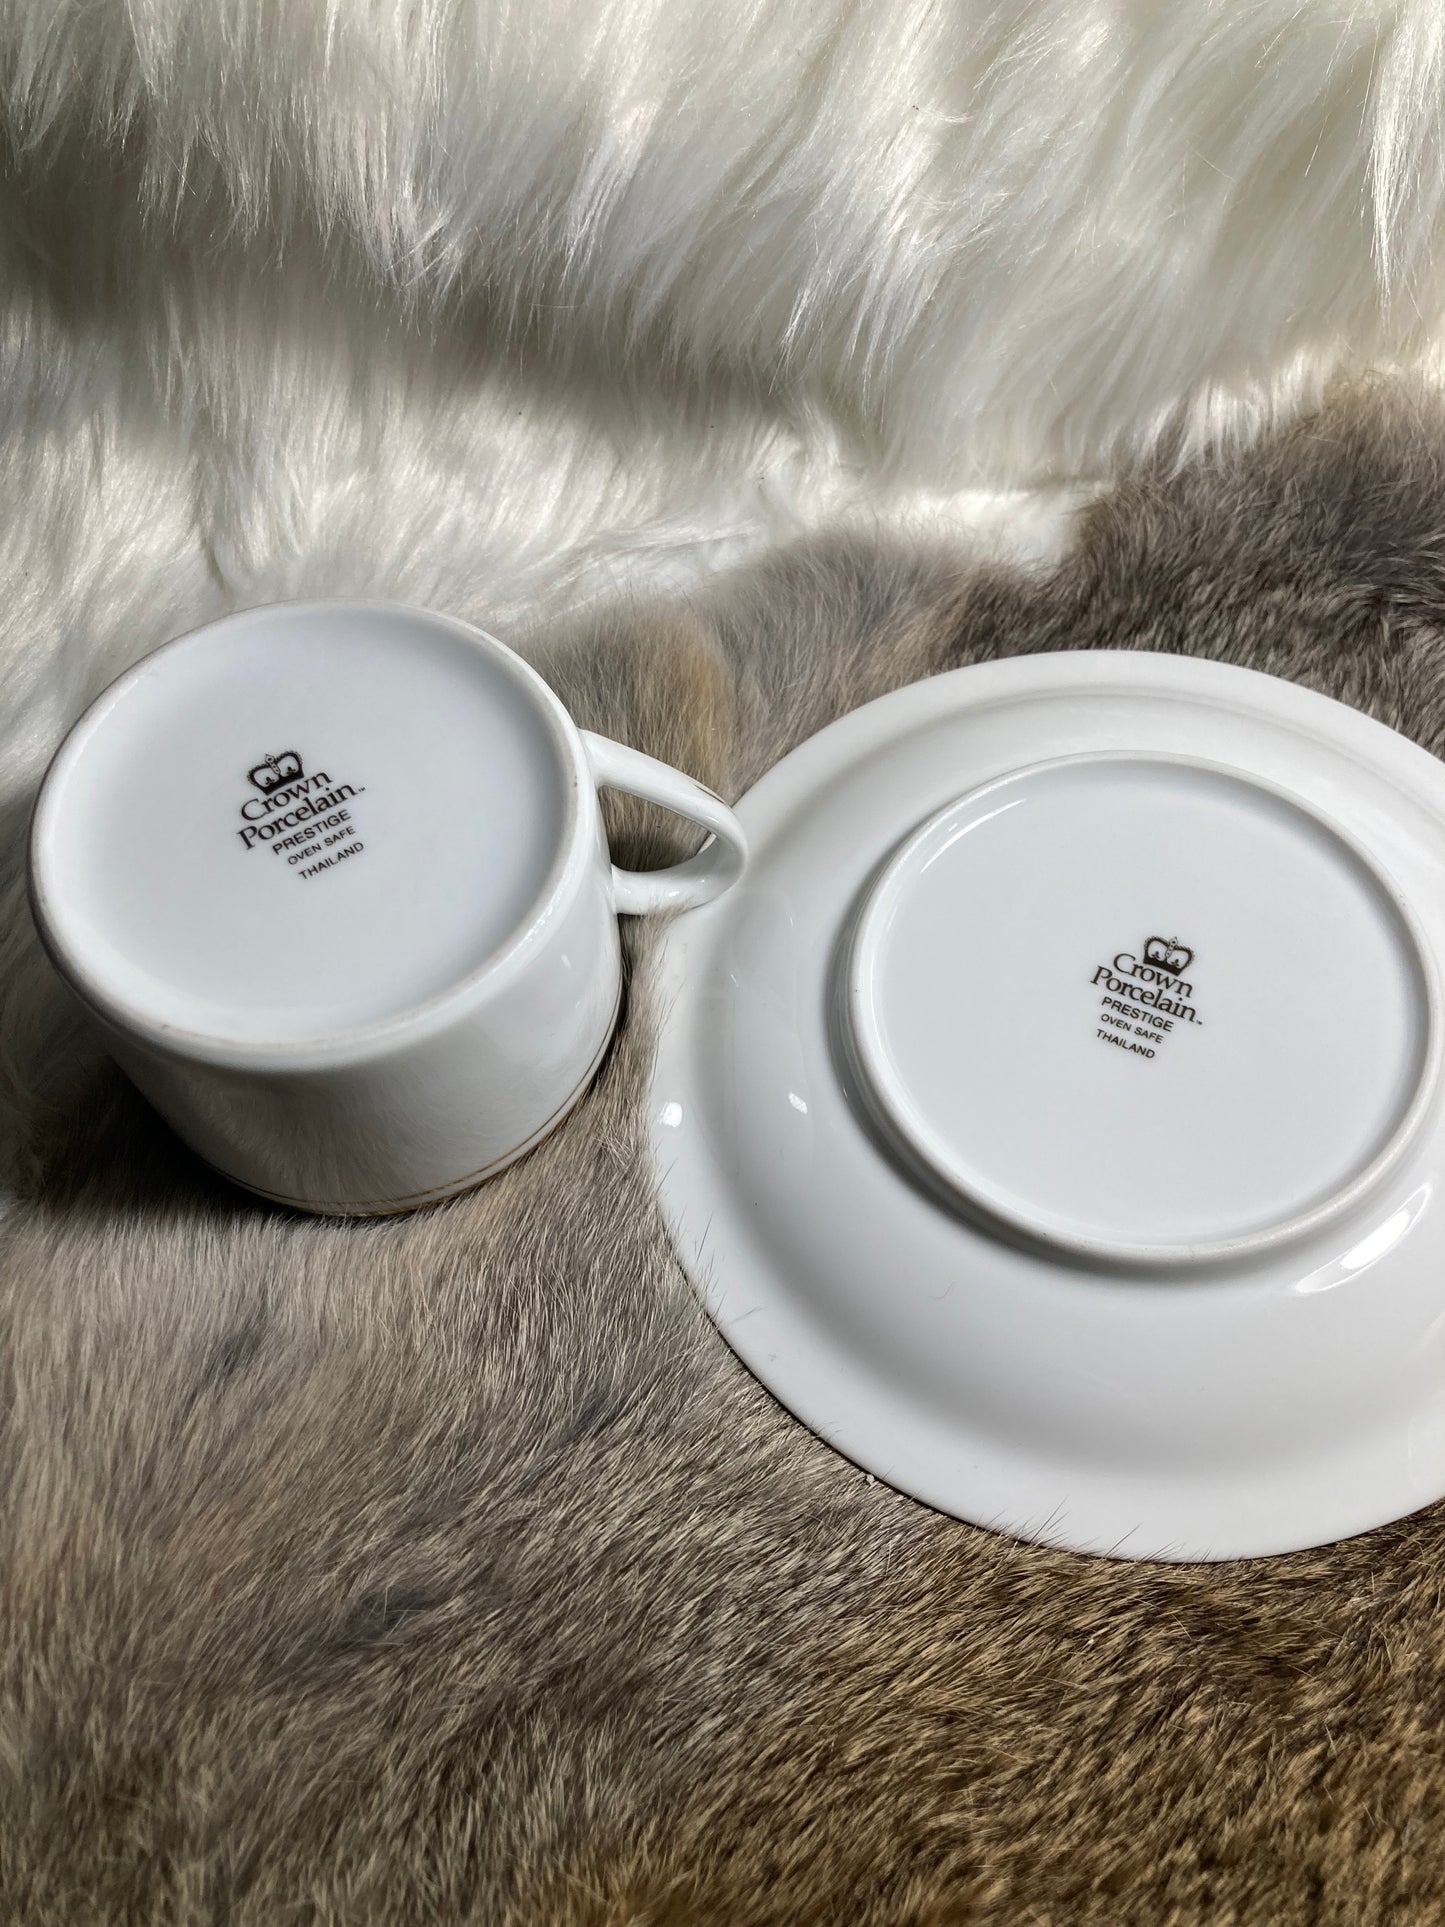 Apothecary Vintage candle teacup and plate set